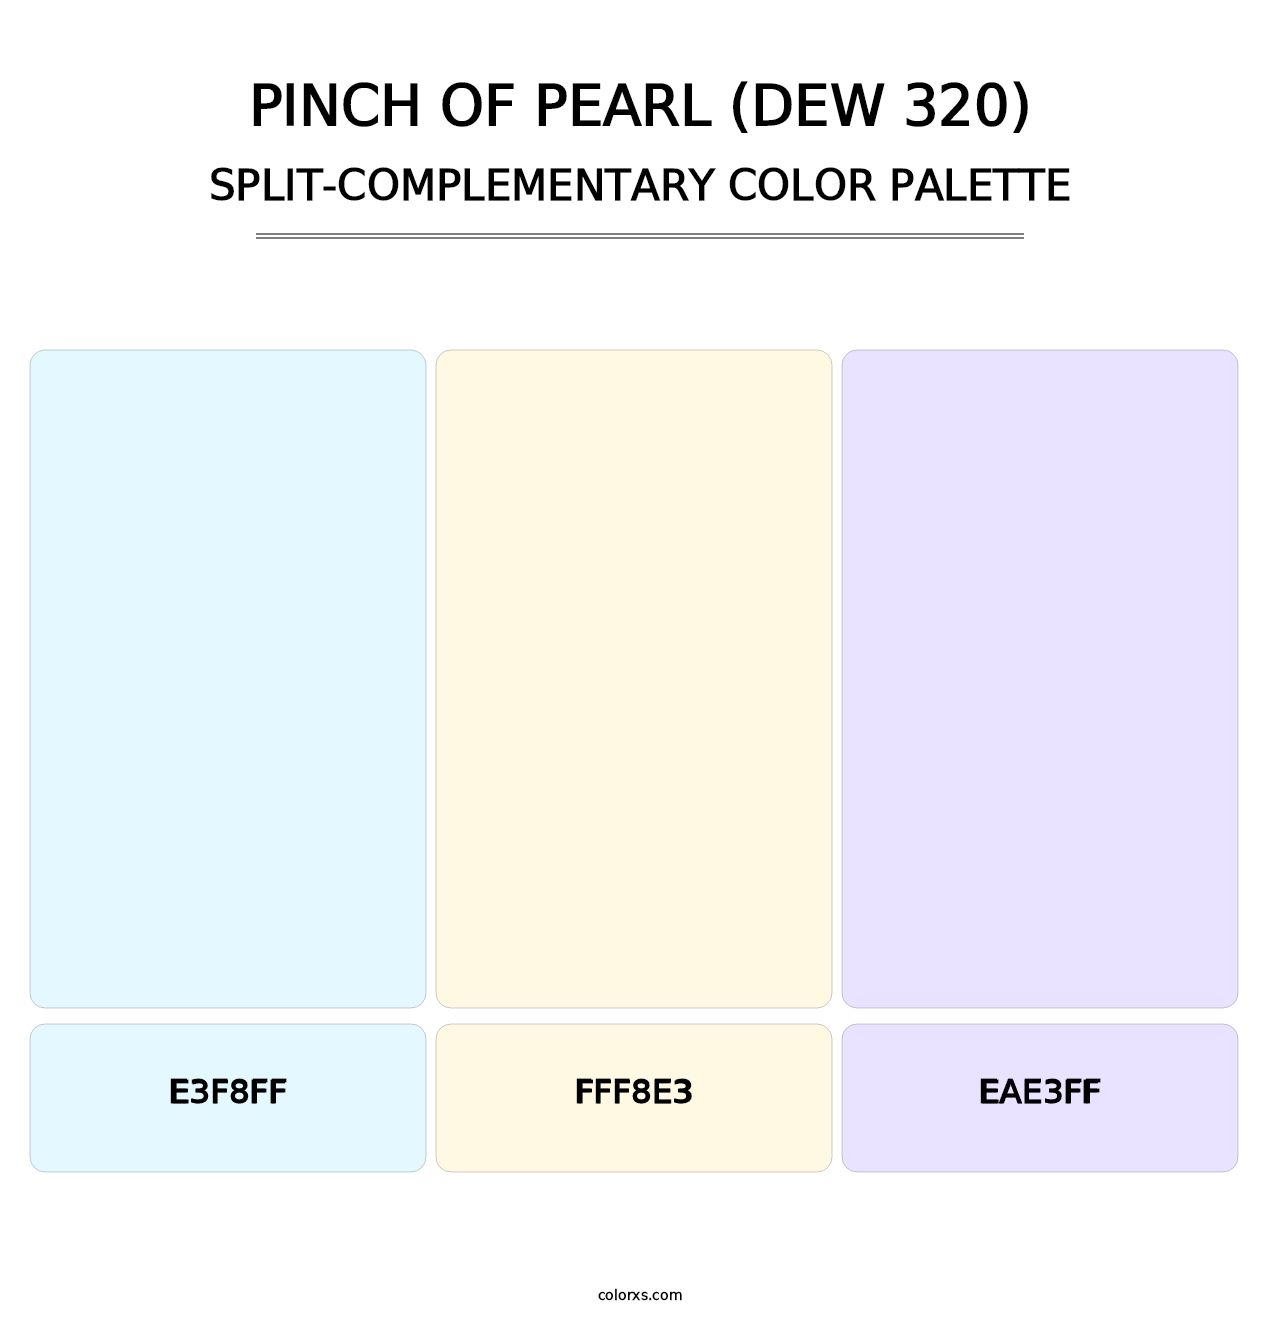 Pinch of Pearl (DEW 320) - Split-Complementary Color Palette